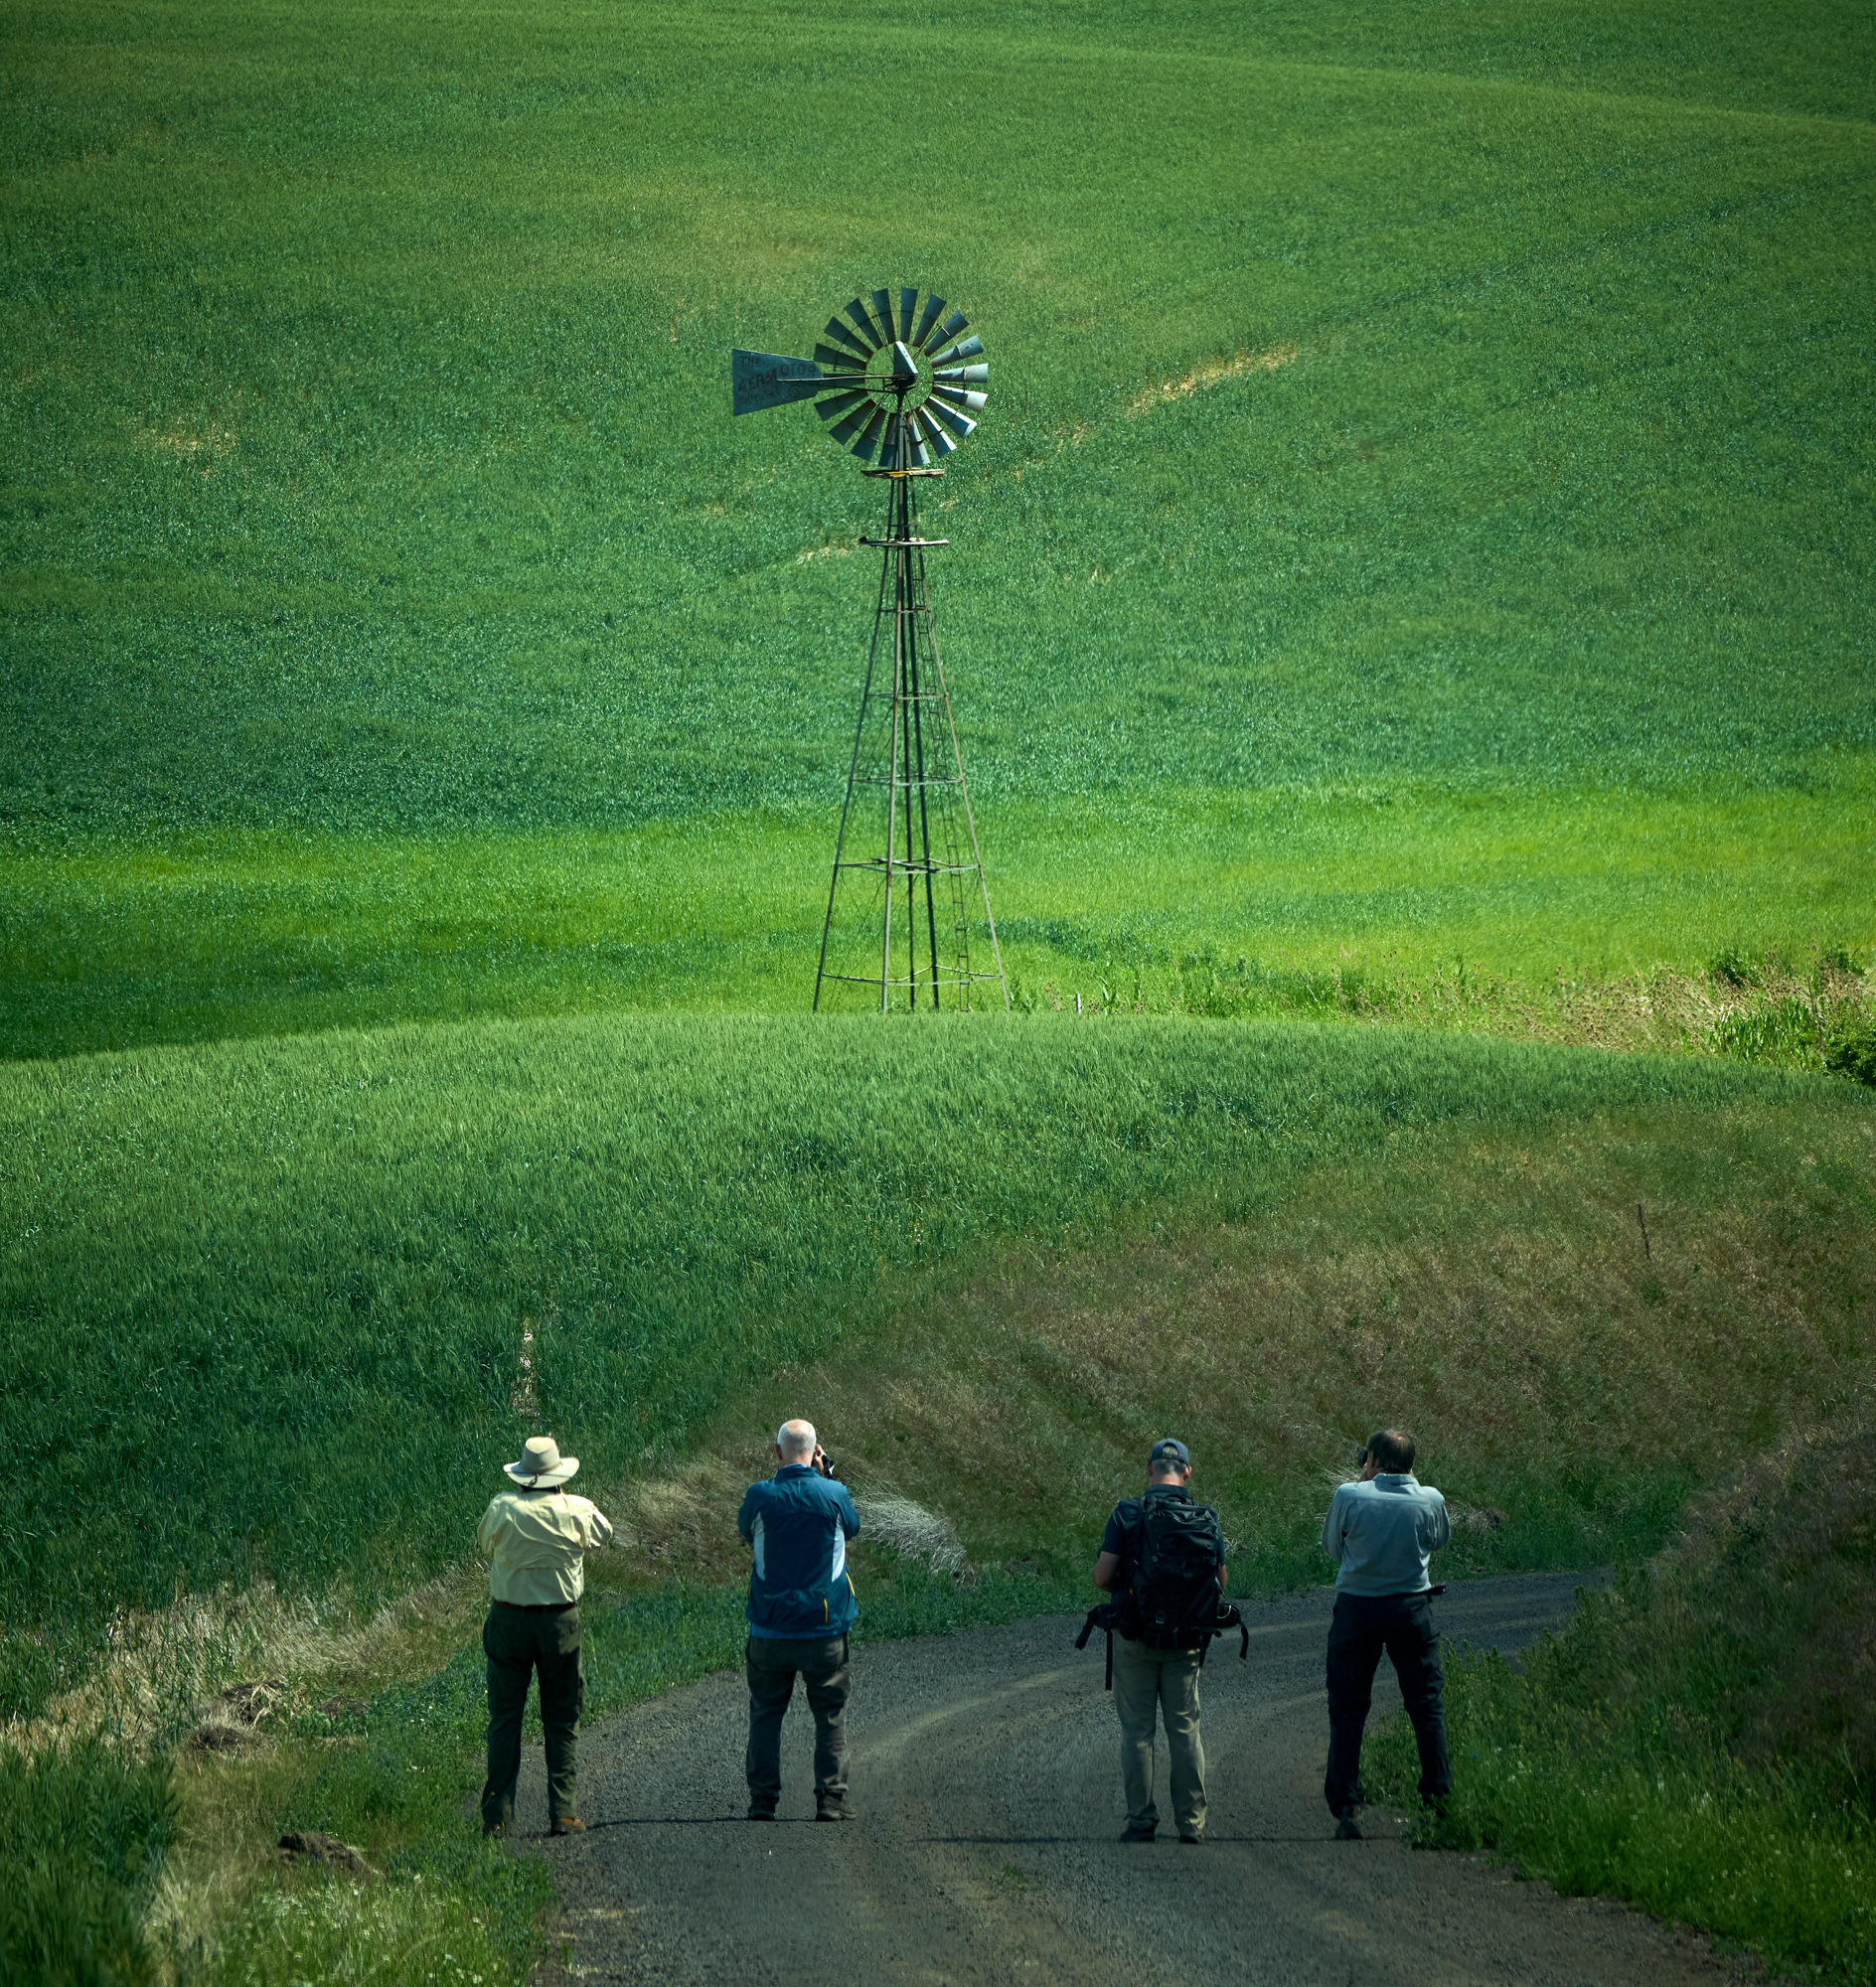 The four attendees of the workshop working on a windmill image